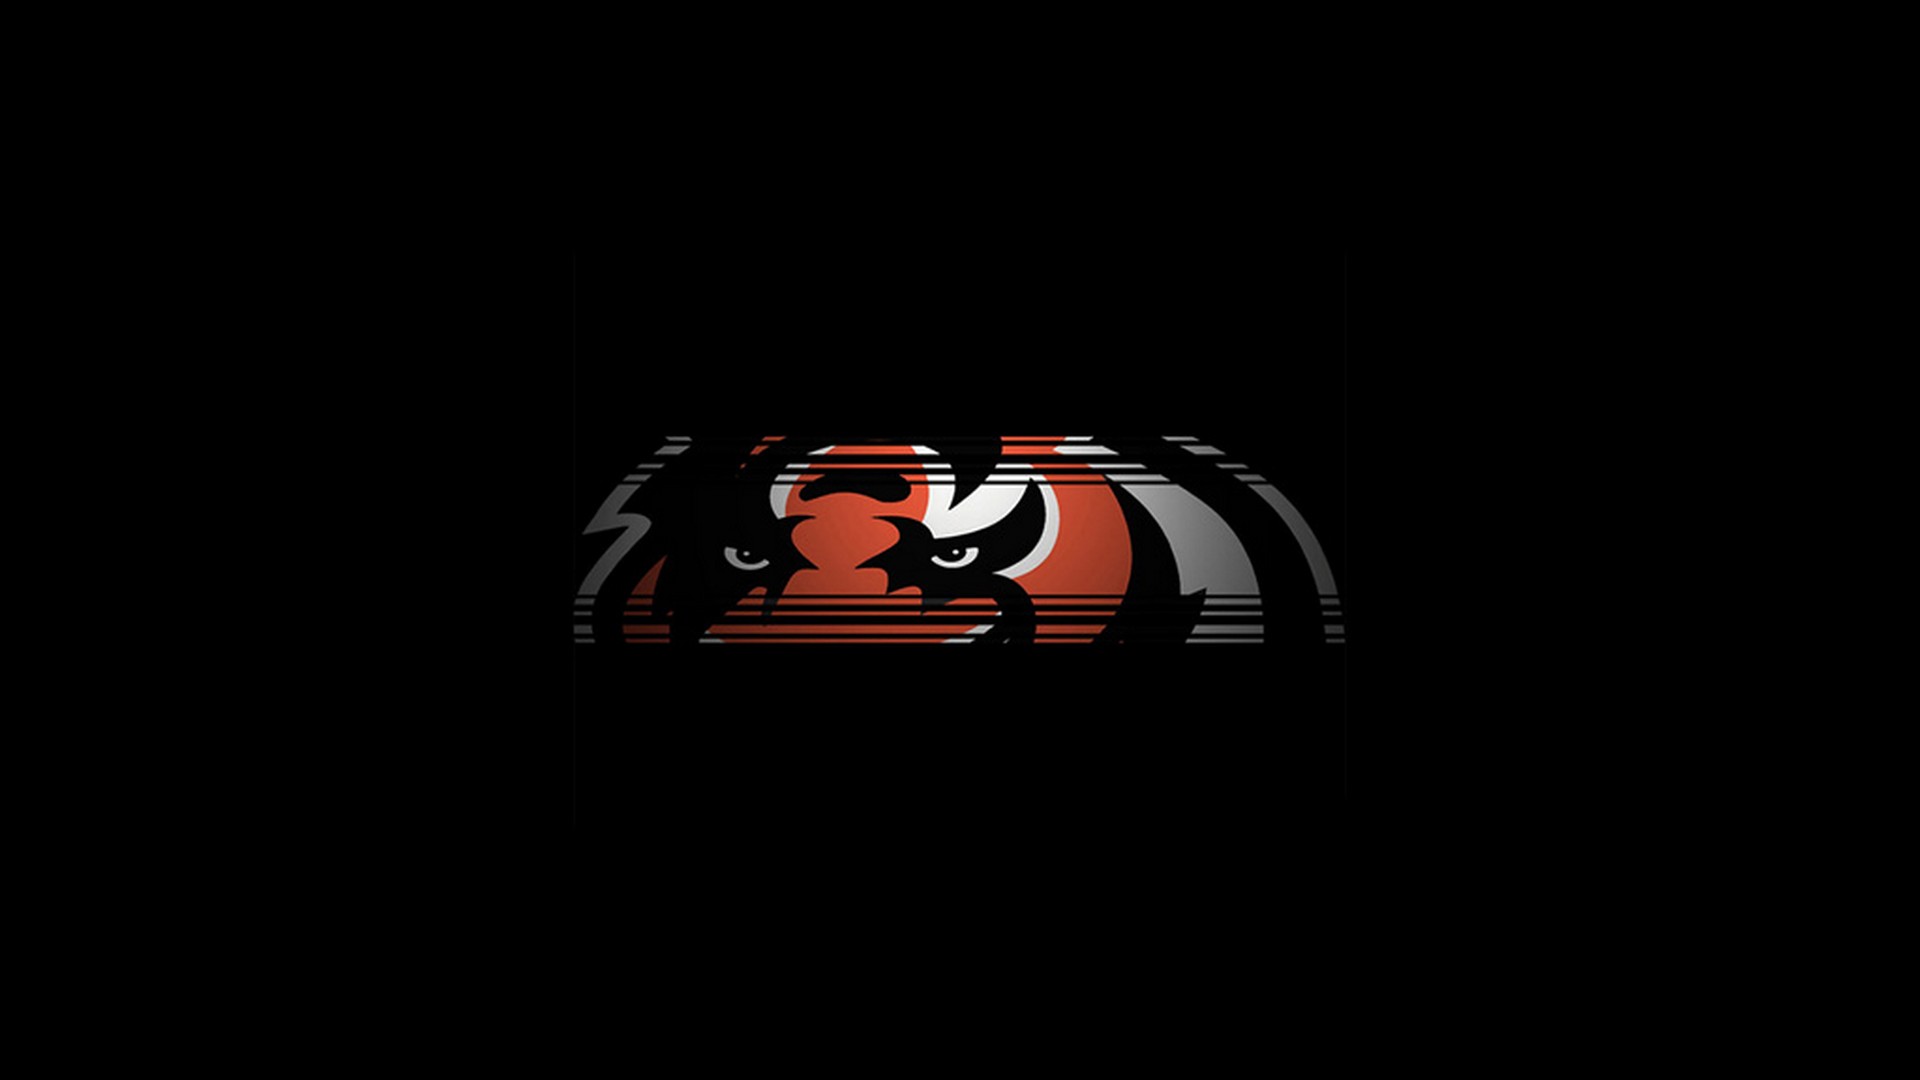 Cincinnati Bengals Laptop Wallpaper with high-resolution 1920x1080 pixel. Download and set as wallpaper for Desktop Computer, Apple iPhone X, XS Max, XR, 8, 7, 6, SE, iPad, Android